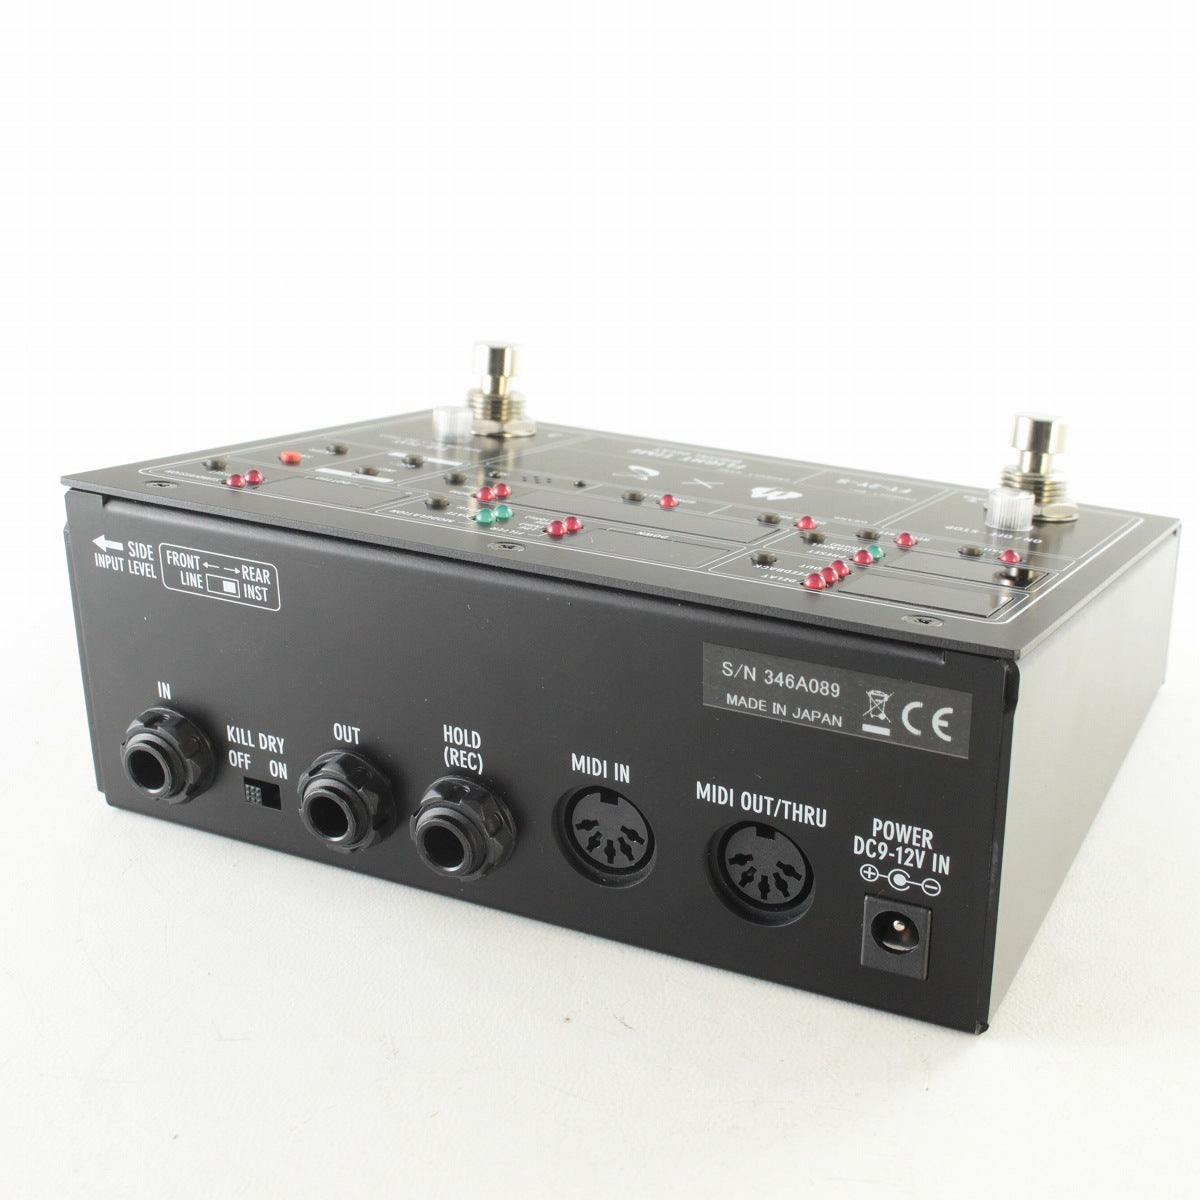 [SN 346A089] USED FREE THE TONE / FT-2Y-S [03]